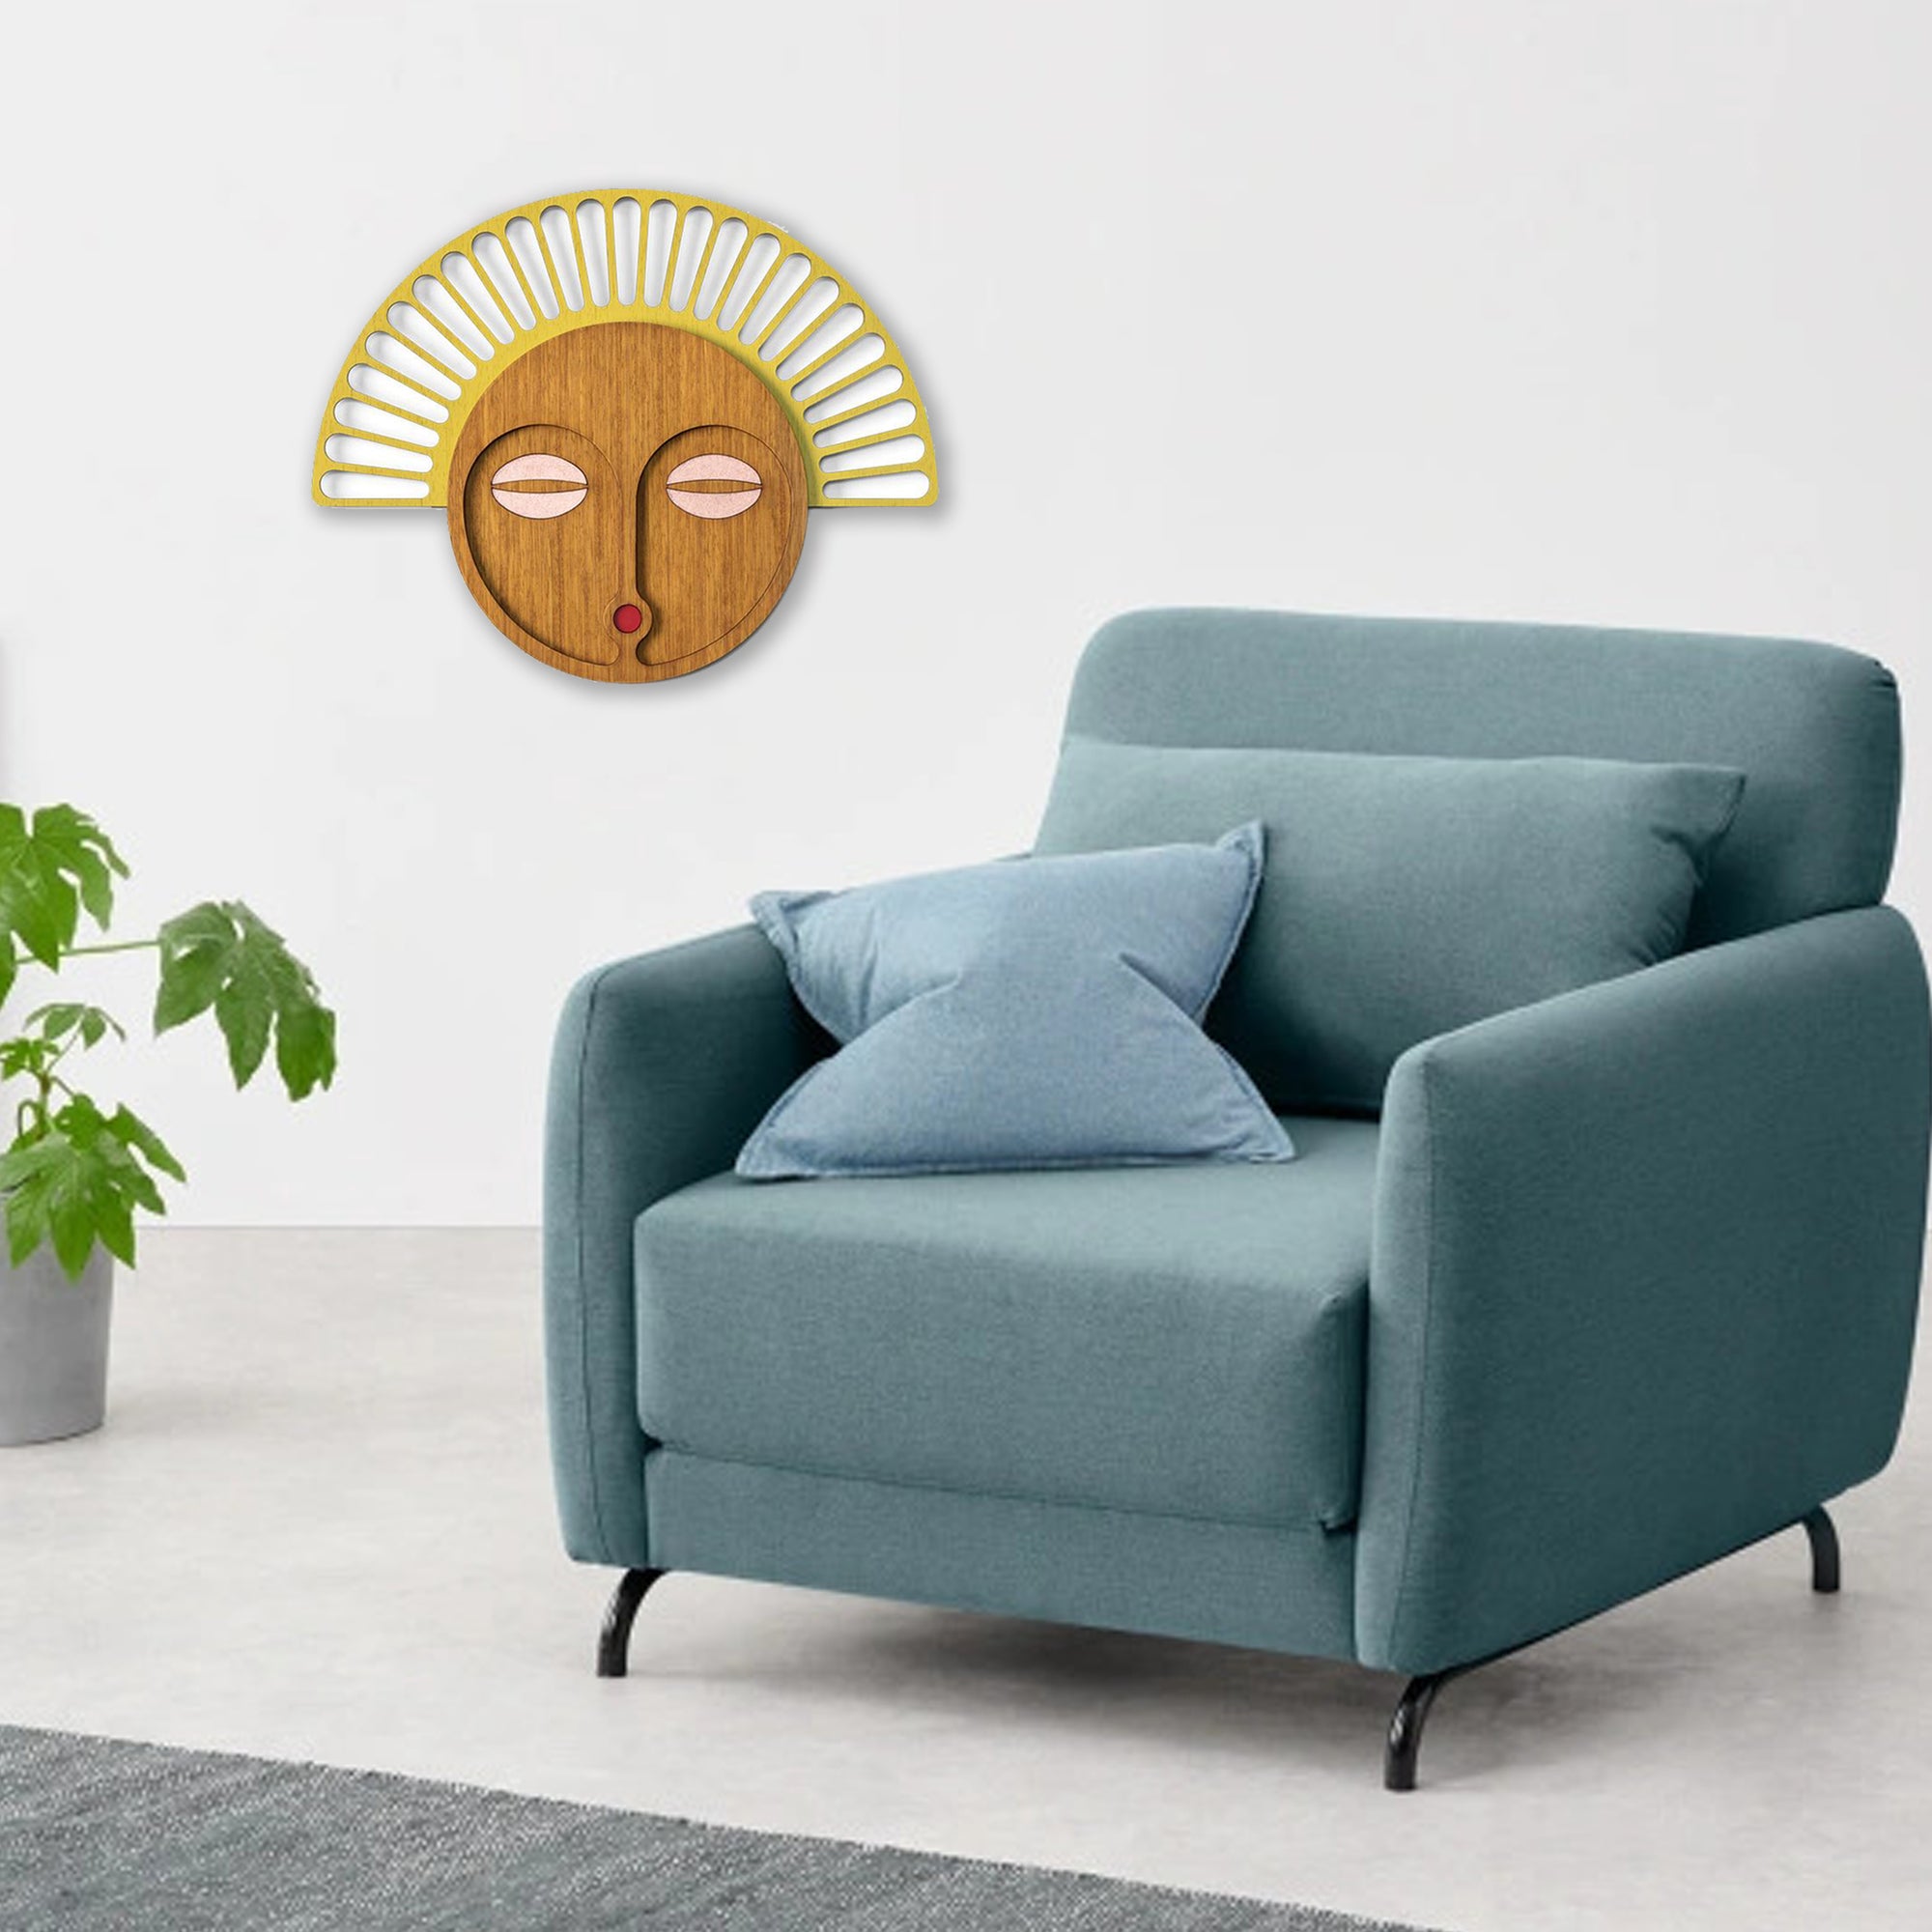 Contemporary Wood Wall Art with African Wall Mask